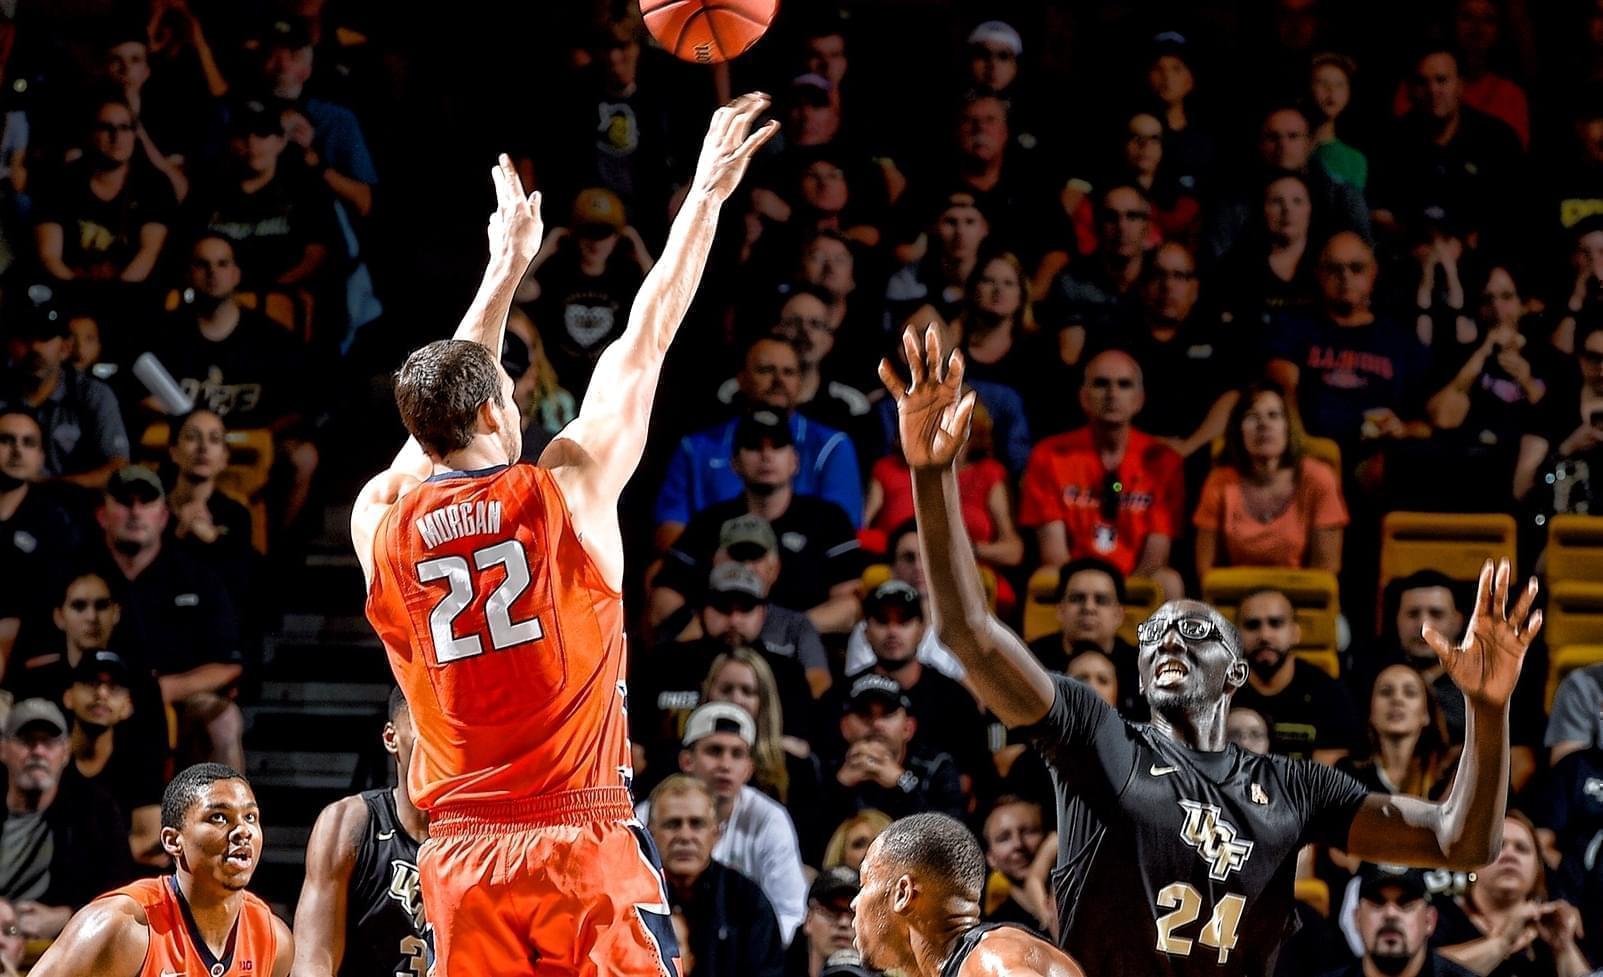 Centers Maverick Morgan with the Illini and Tacko Fall of UCF compete for the ball during their Wednesday night NIT quarterfinal game in Orlando. 